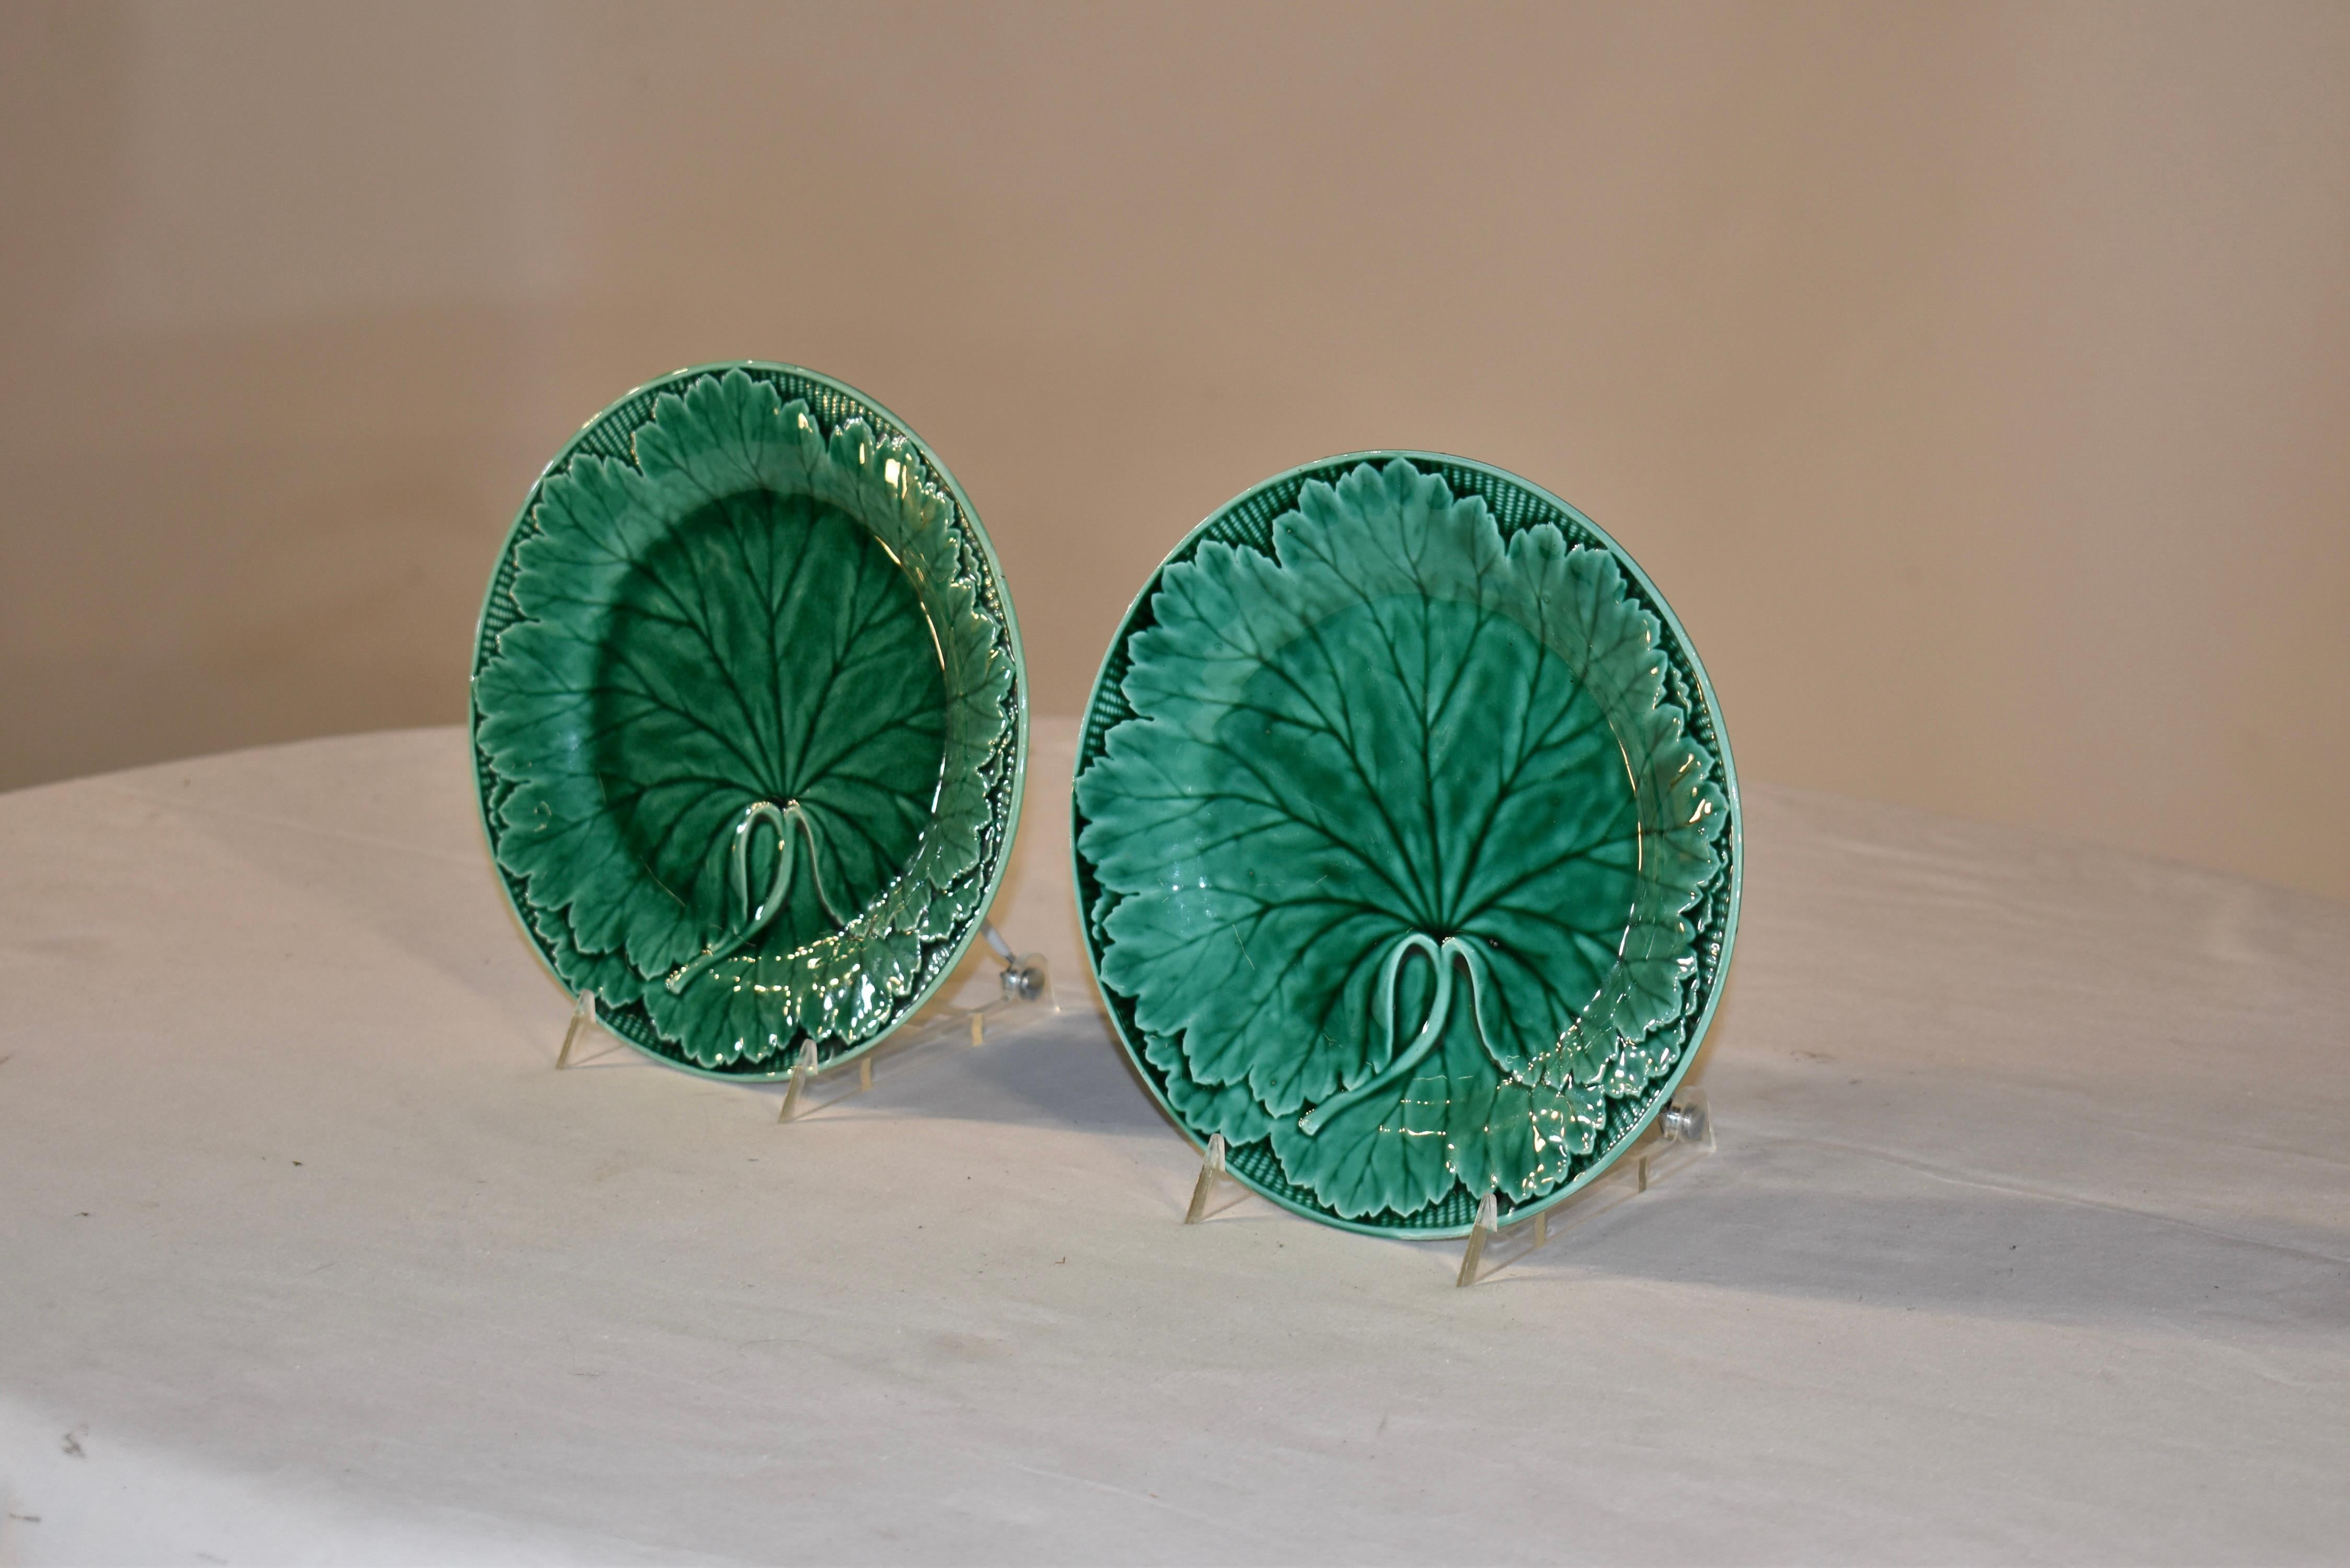 Pair of 19th century Wedgwood majolica plates in rich shades of green. The molds are crisp and have loads of detail in the leaves and surrounding basketweave design. The pieces have the impressed mark WEDGWOOD on the backs.